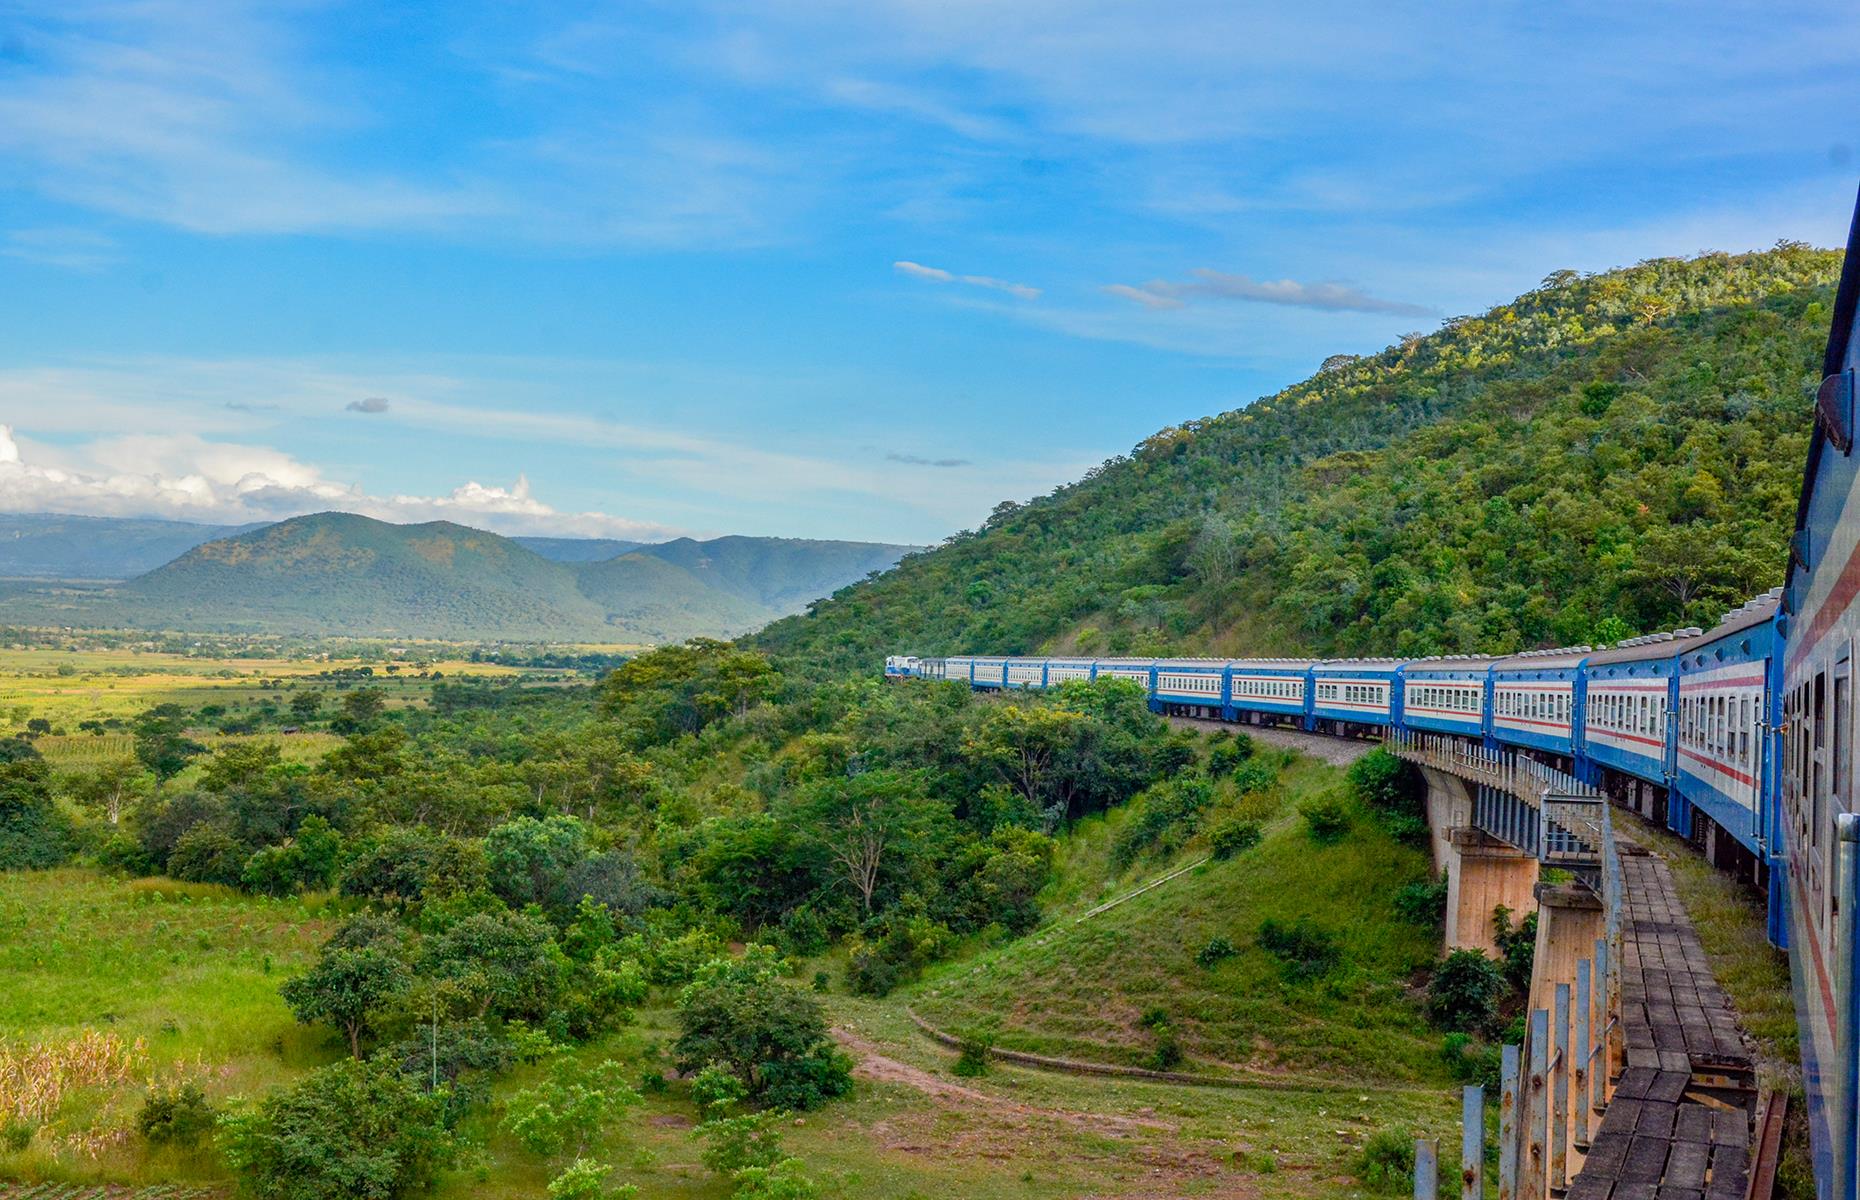 <p>The <a href="https://www.tazarasite.com/">TAZARA</a> (Tanzania & Zambia Railway Authority) route is a great way of experiencing a safari without splashing out. The train travels from Dar es Salaam in Tanzania to the Zambian town of Kapiri Mposhi through the Selous game reserve, offering a chance to spot elephants, lions, giraffes and more. The journey covers 1,150 miles (1,852km) and takes just under 48 hours to complete.</p>